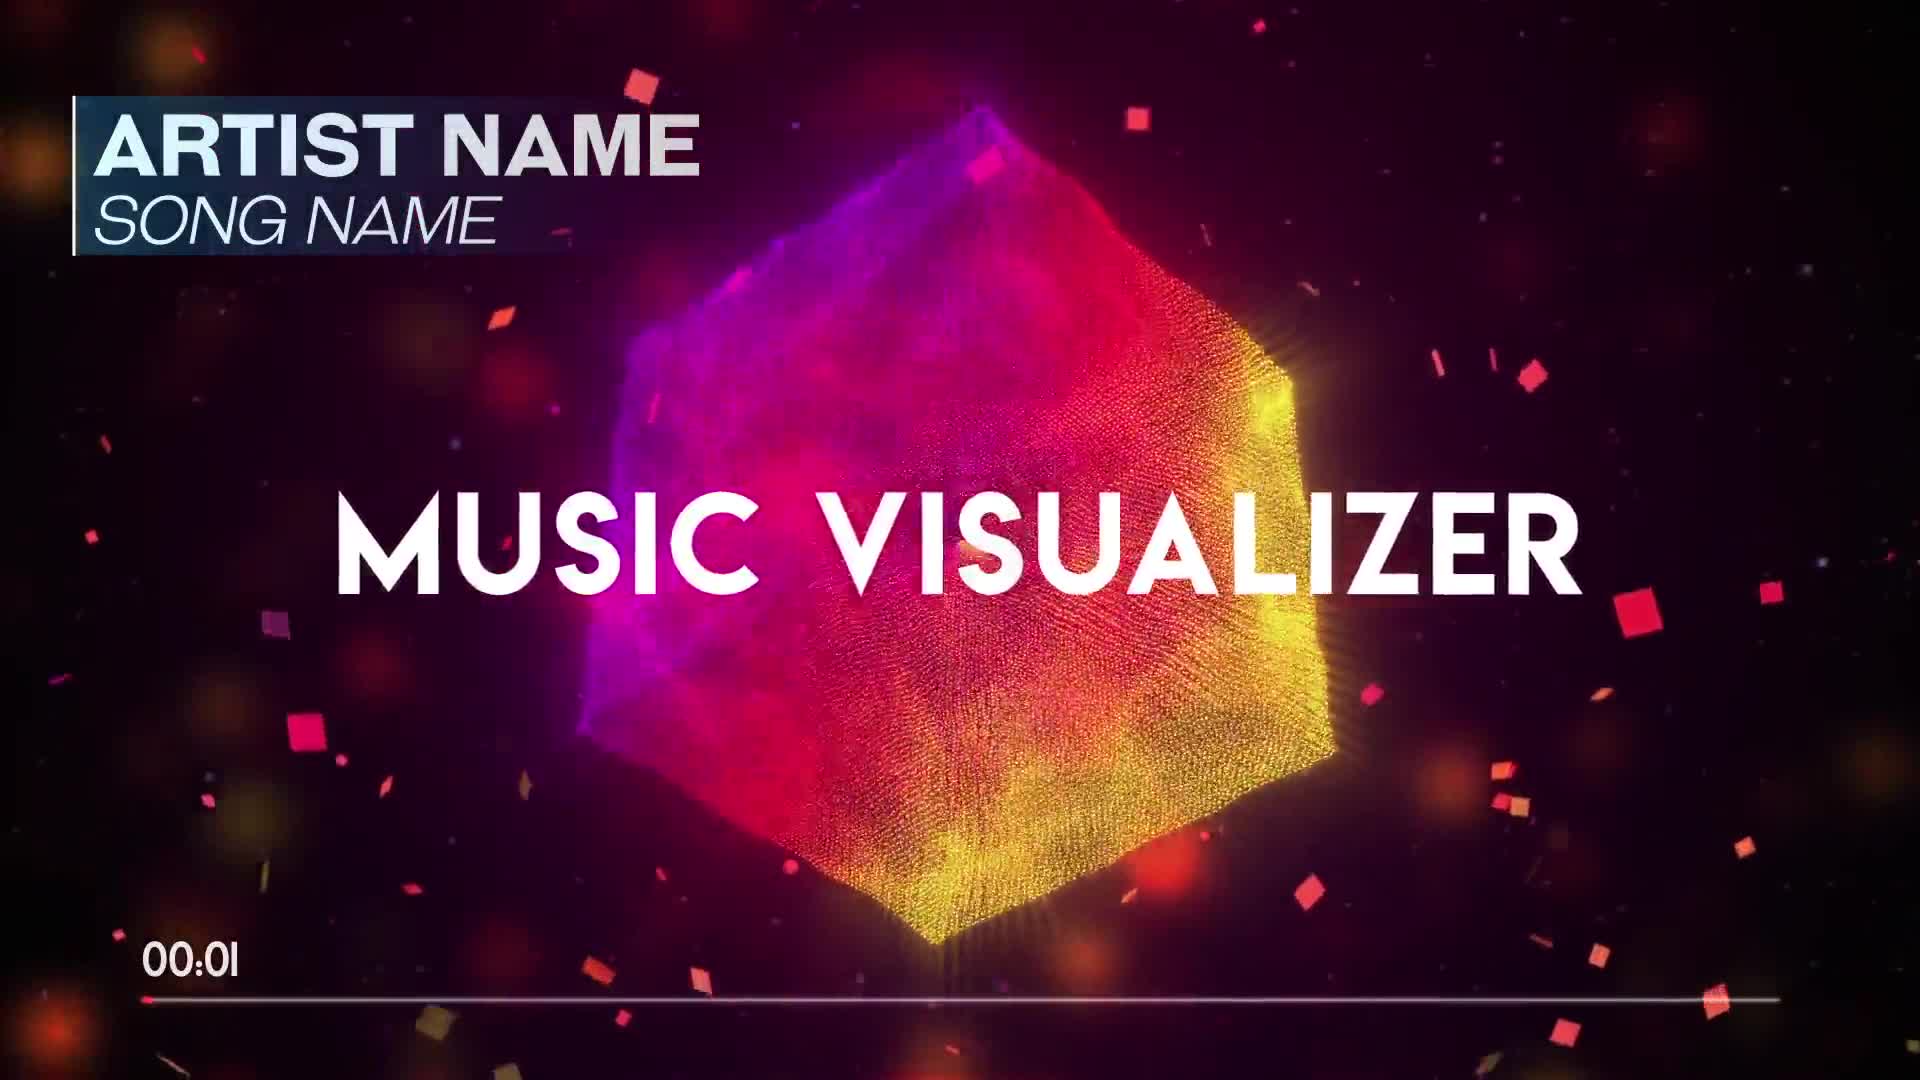 audio spectrum music visualizer videohive free download after effects projects